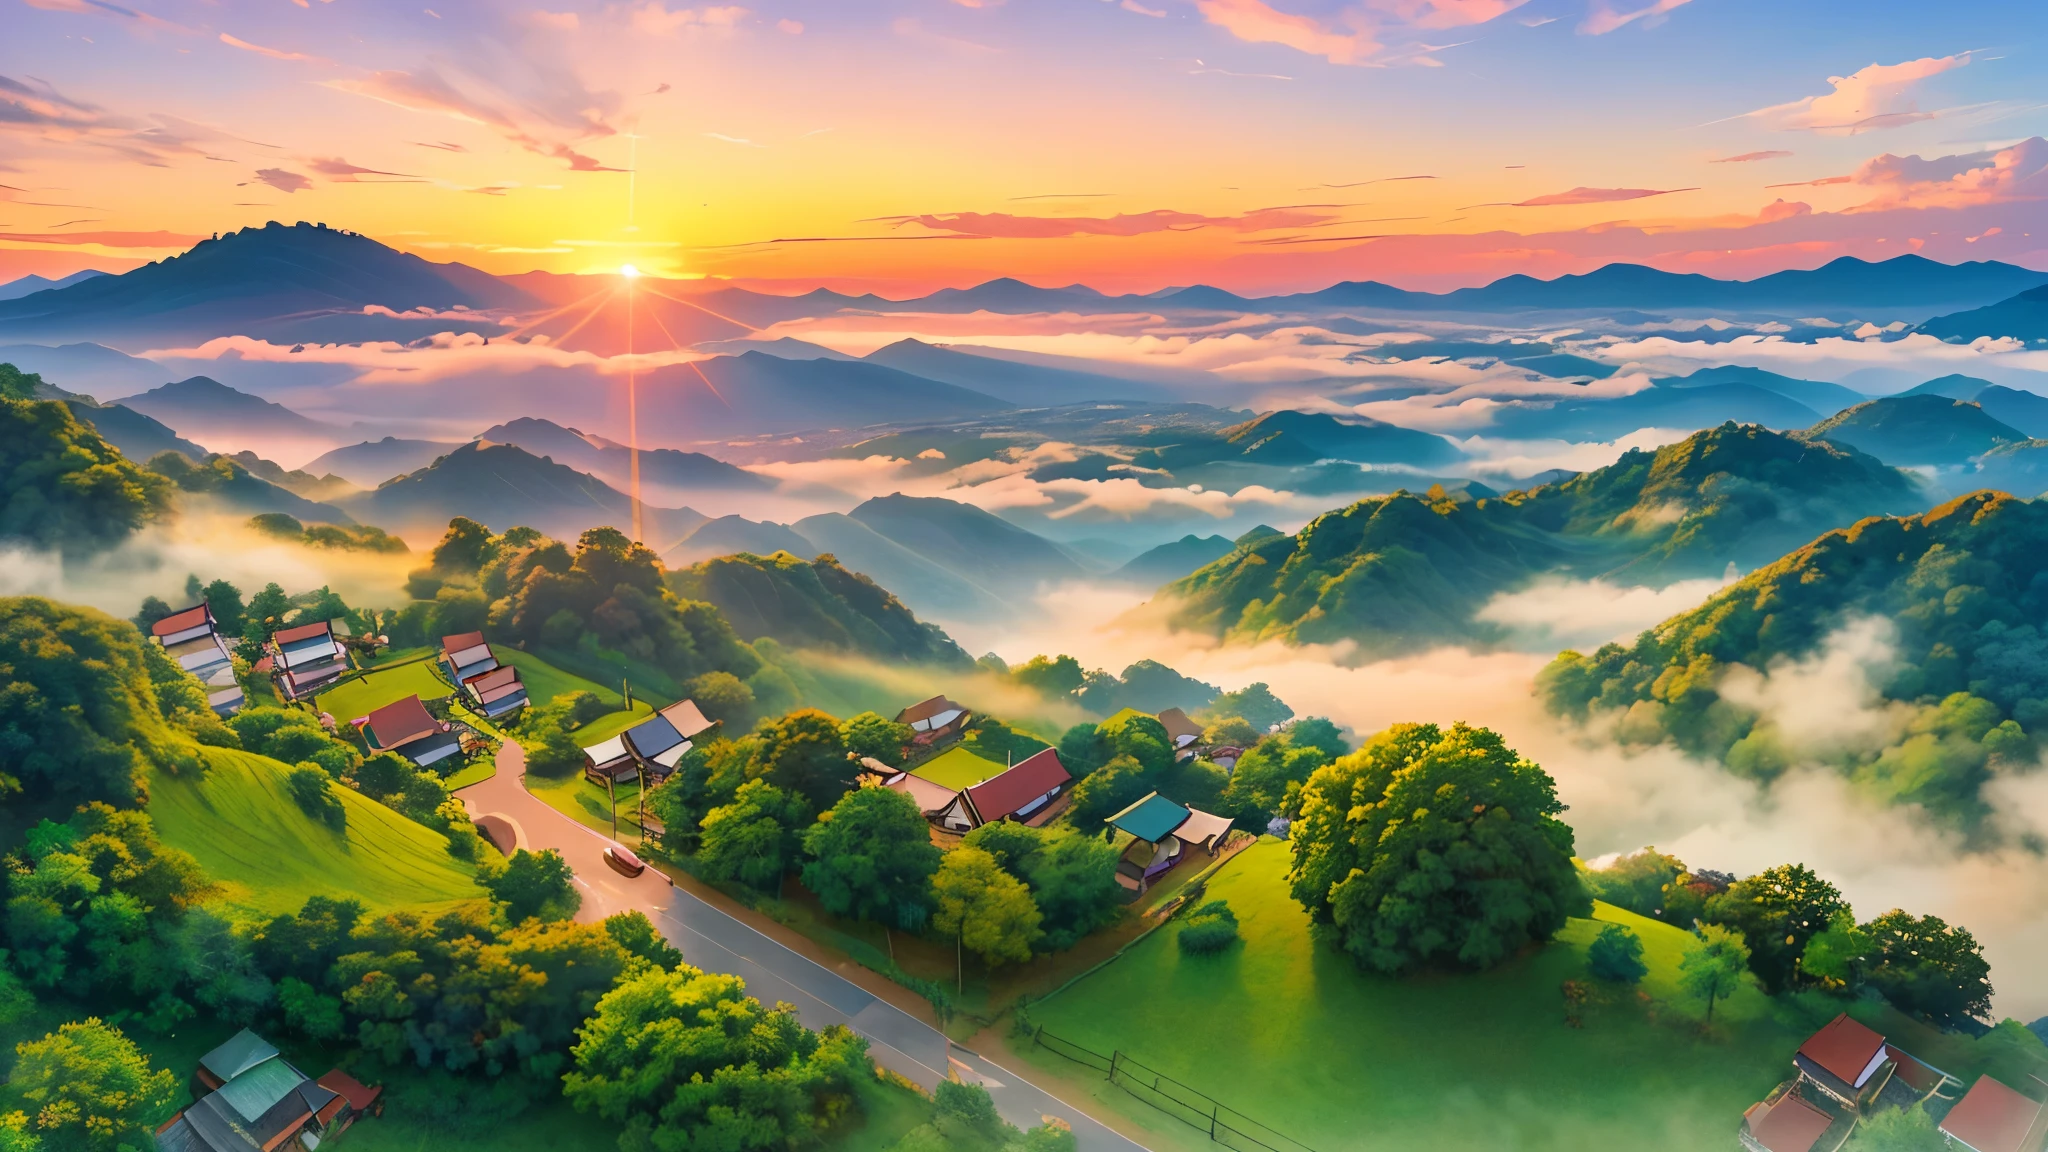 An anime-style panoramic drone shot captures the serene beauty of Chiang Rai's lush green mountains, enveloped in a gentle sea of mist at dawn.
Strawberry fields add vibrant patches of red to the landscape, contrasting with the verdant hues.
Above, the sky is a clear, brilliant blue, with the rising sun casting a soft, golden light that illuminates the scene with a dreamy glow.